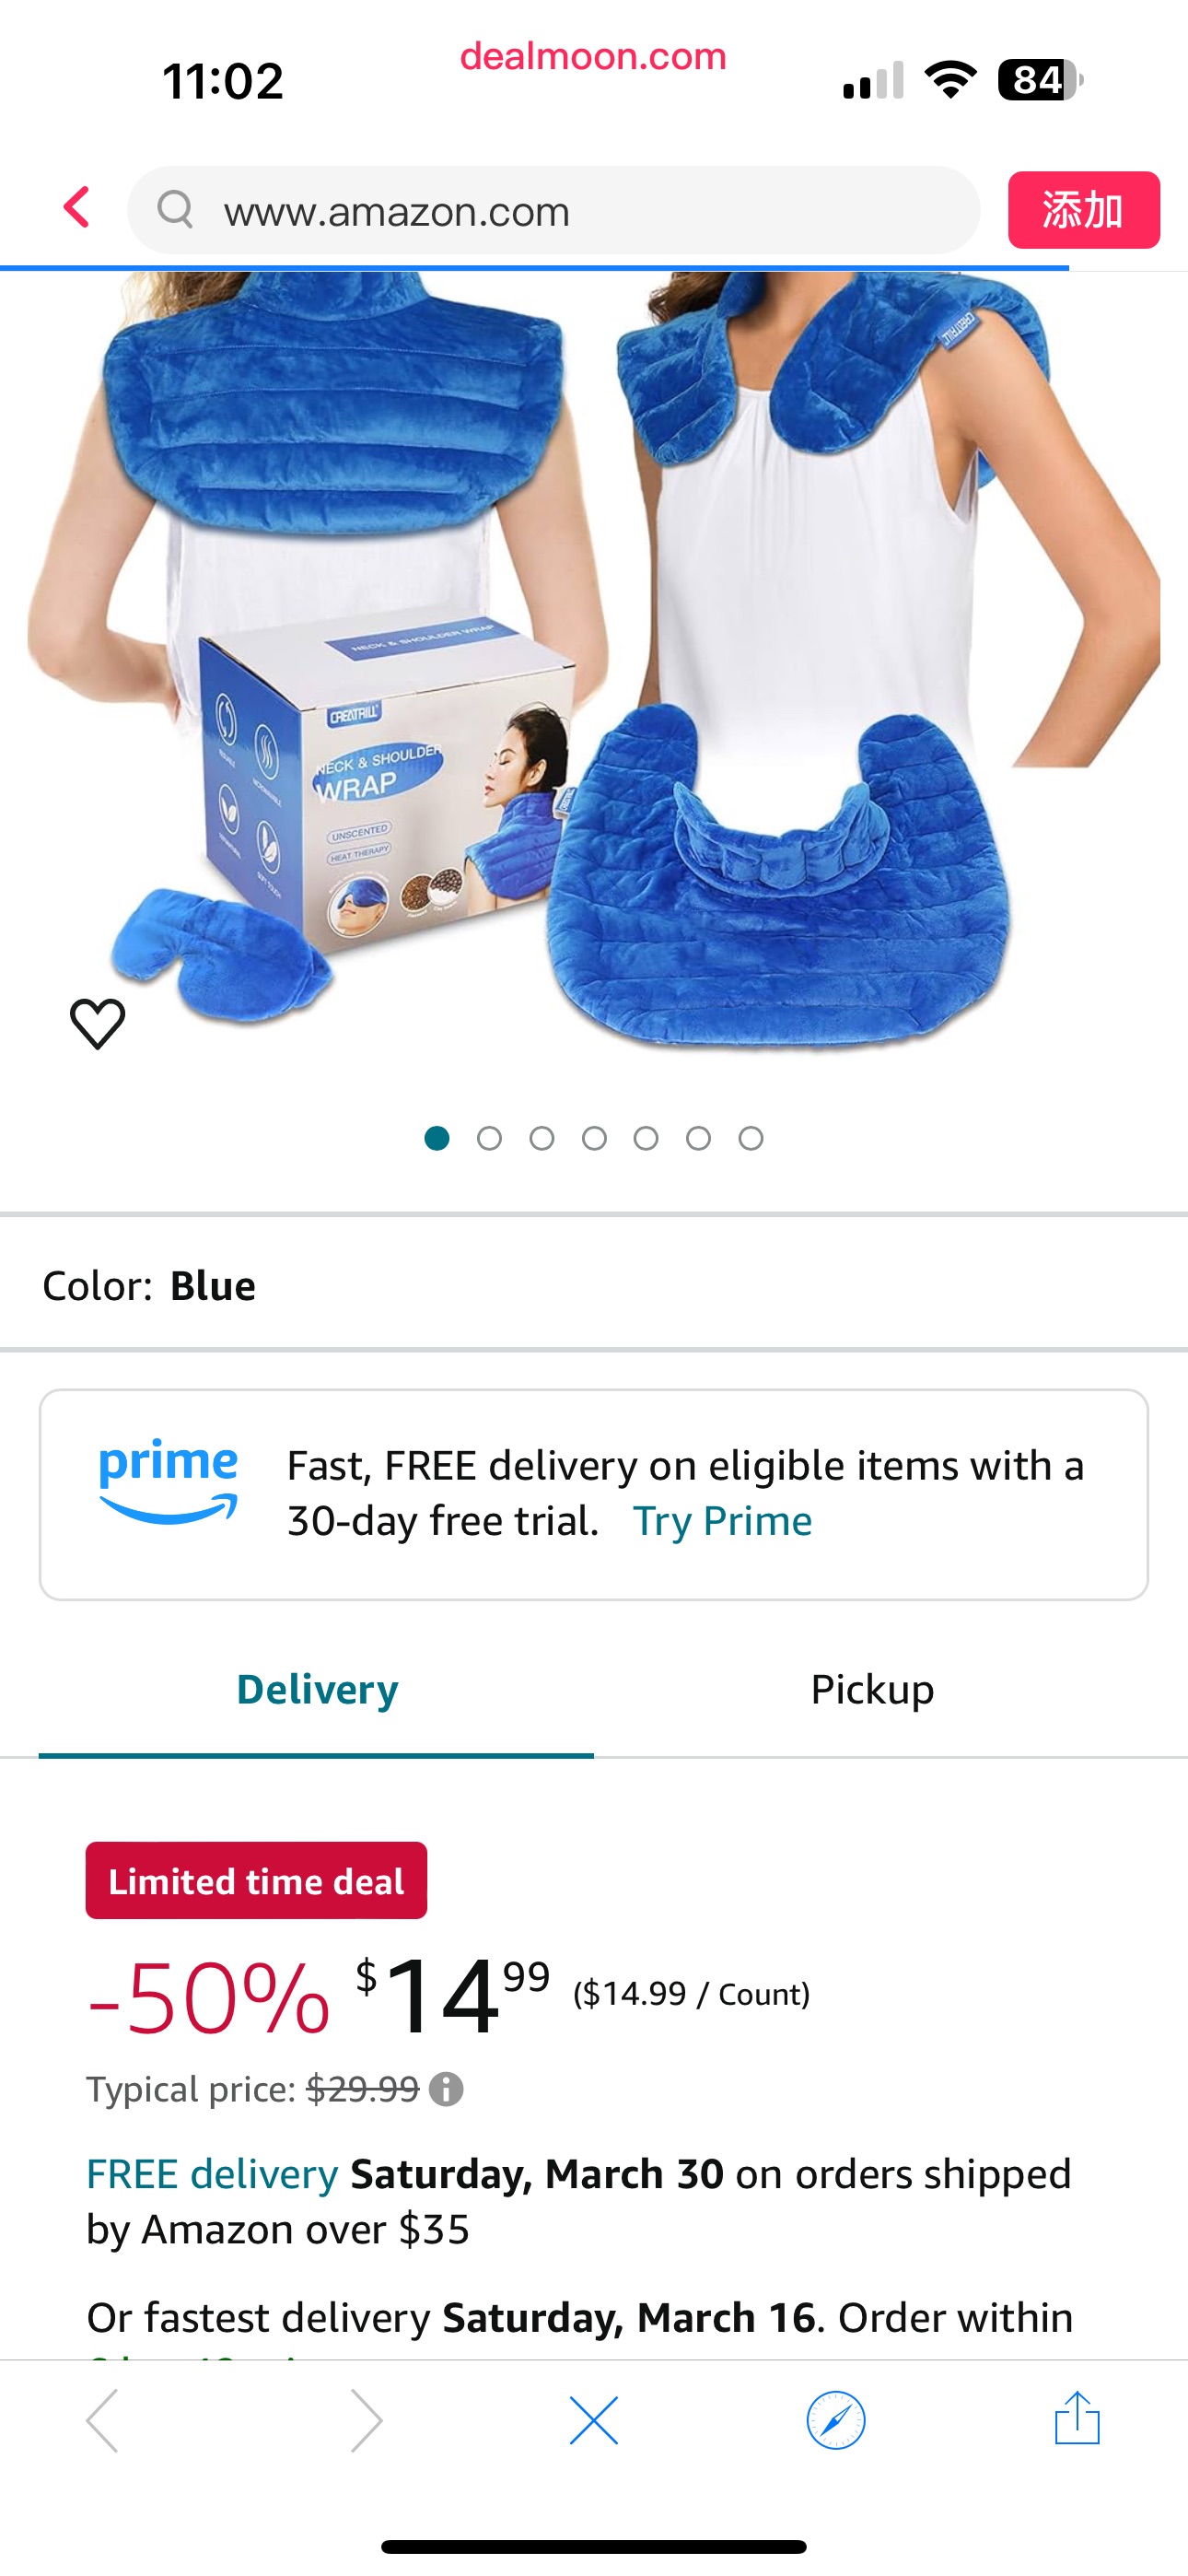 Amazon.com: CREATRILL Neck and Shoulder Wrap Unscented Moist Heat Therapy Plus Microwave Eye Compress Relief for Headaches Aches Spasms Stiffness Tightness (Blue) : Health & Household微波加热肩背理疗垫 加眼罩